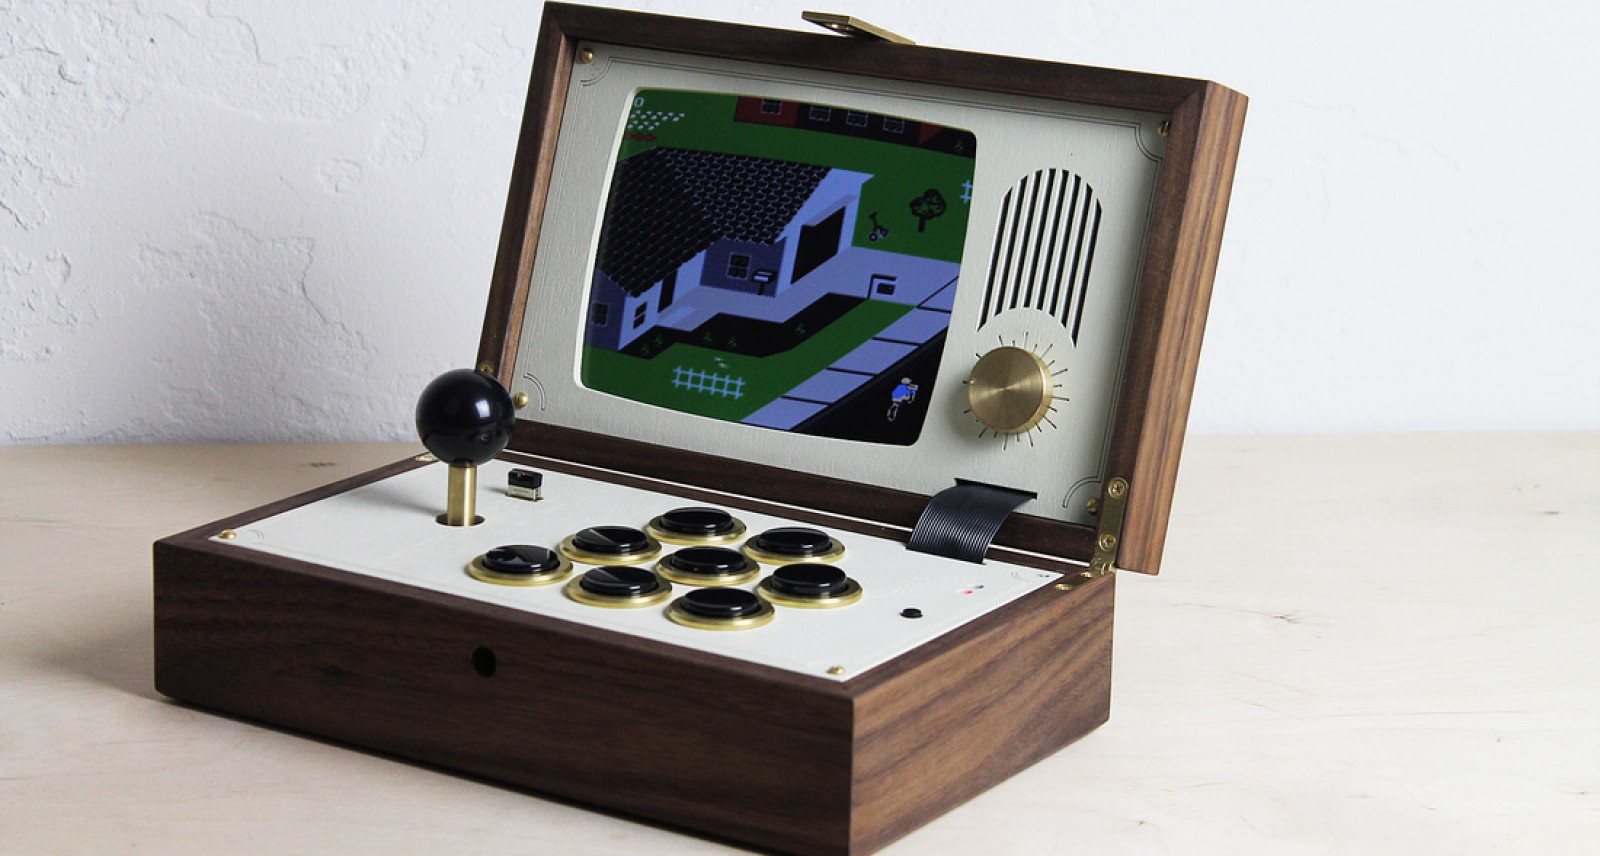 You Can Play 10 000 Classic Video Games On This Portable 